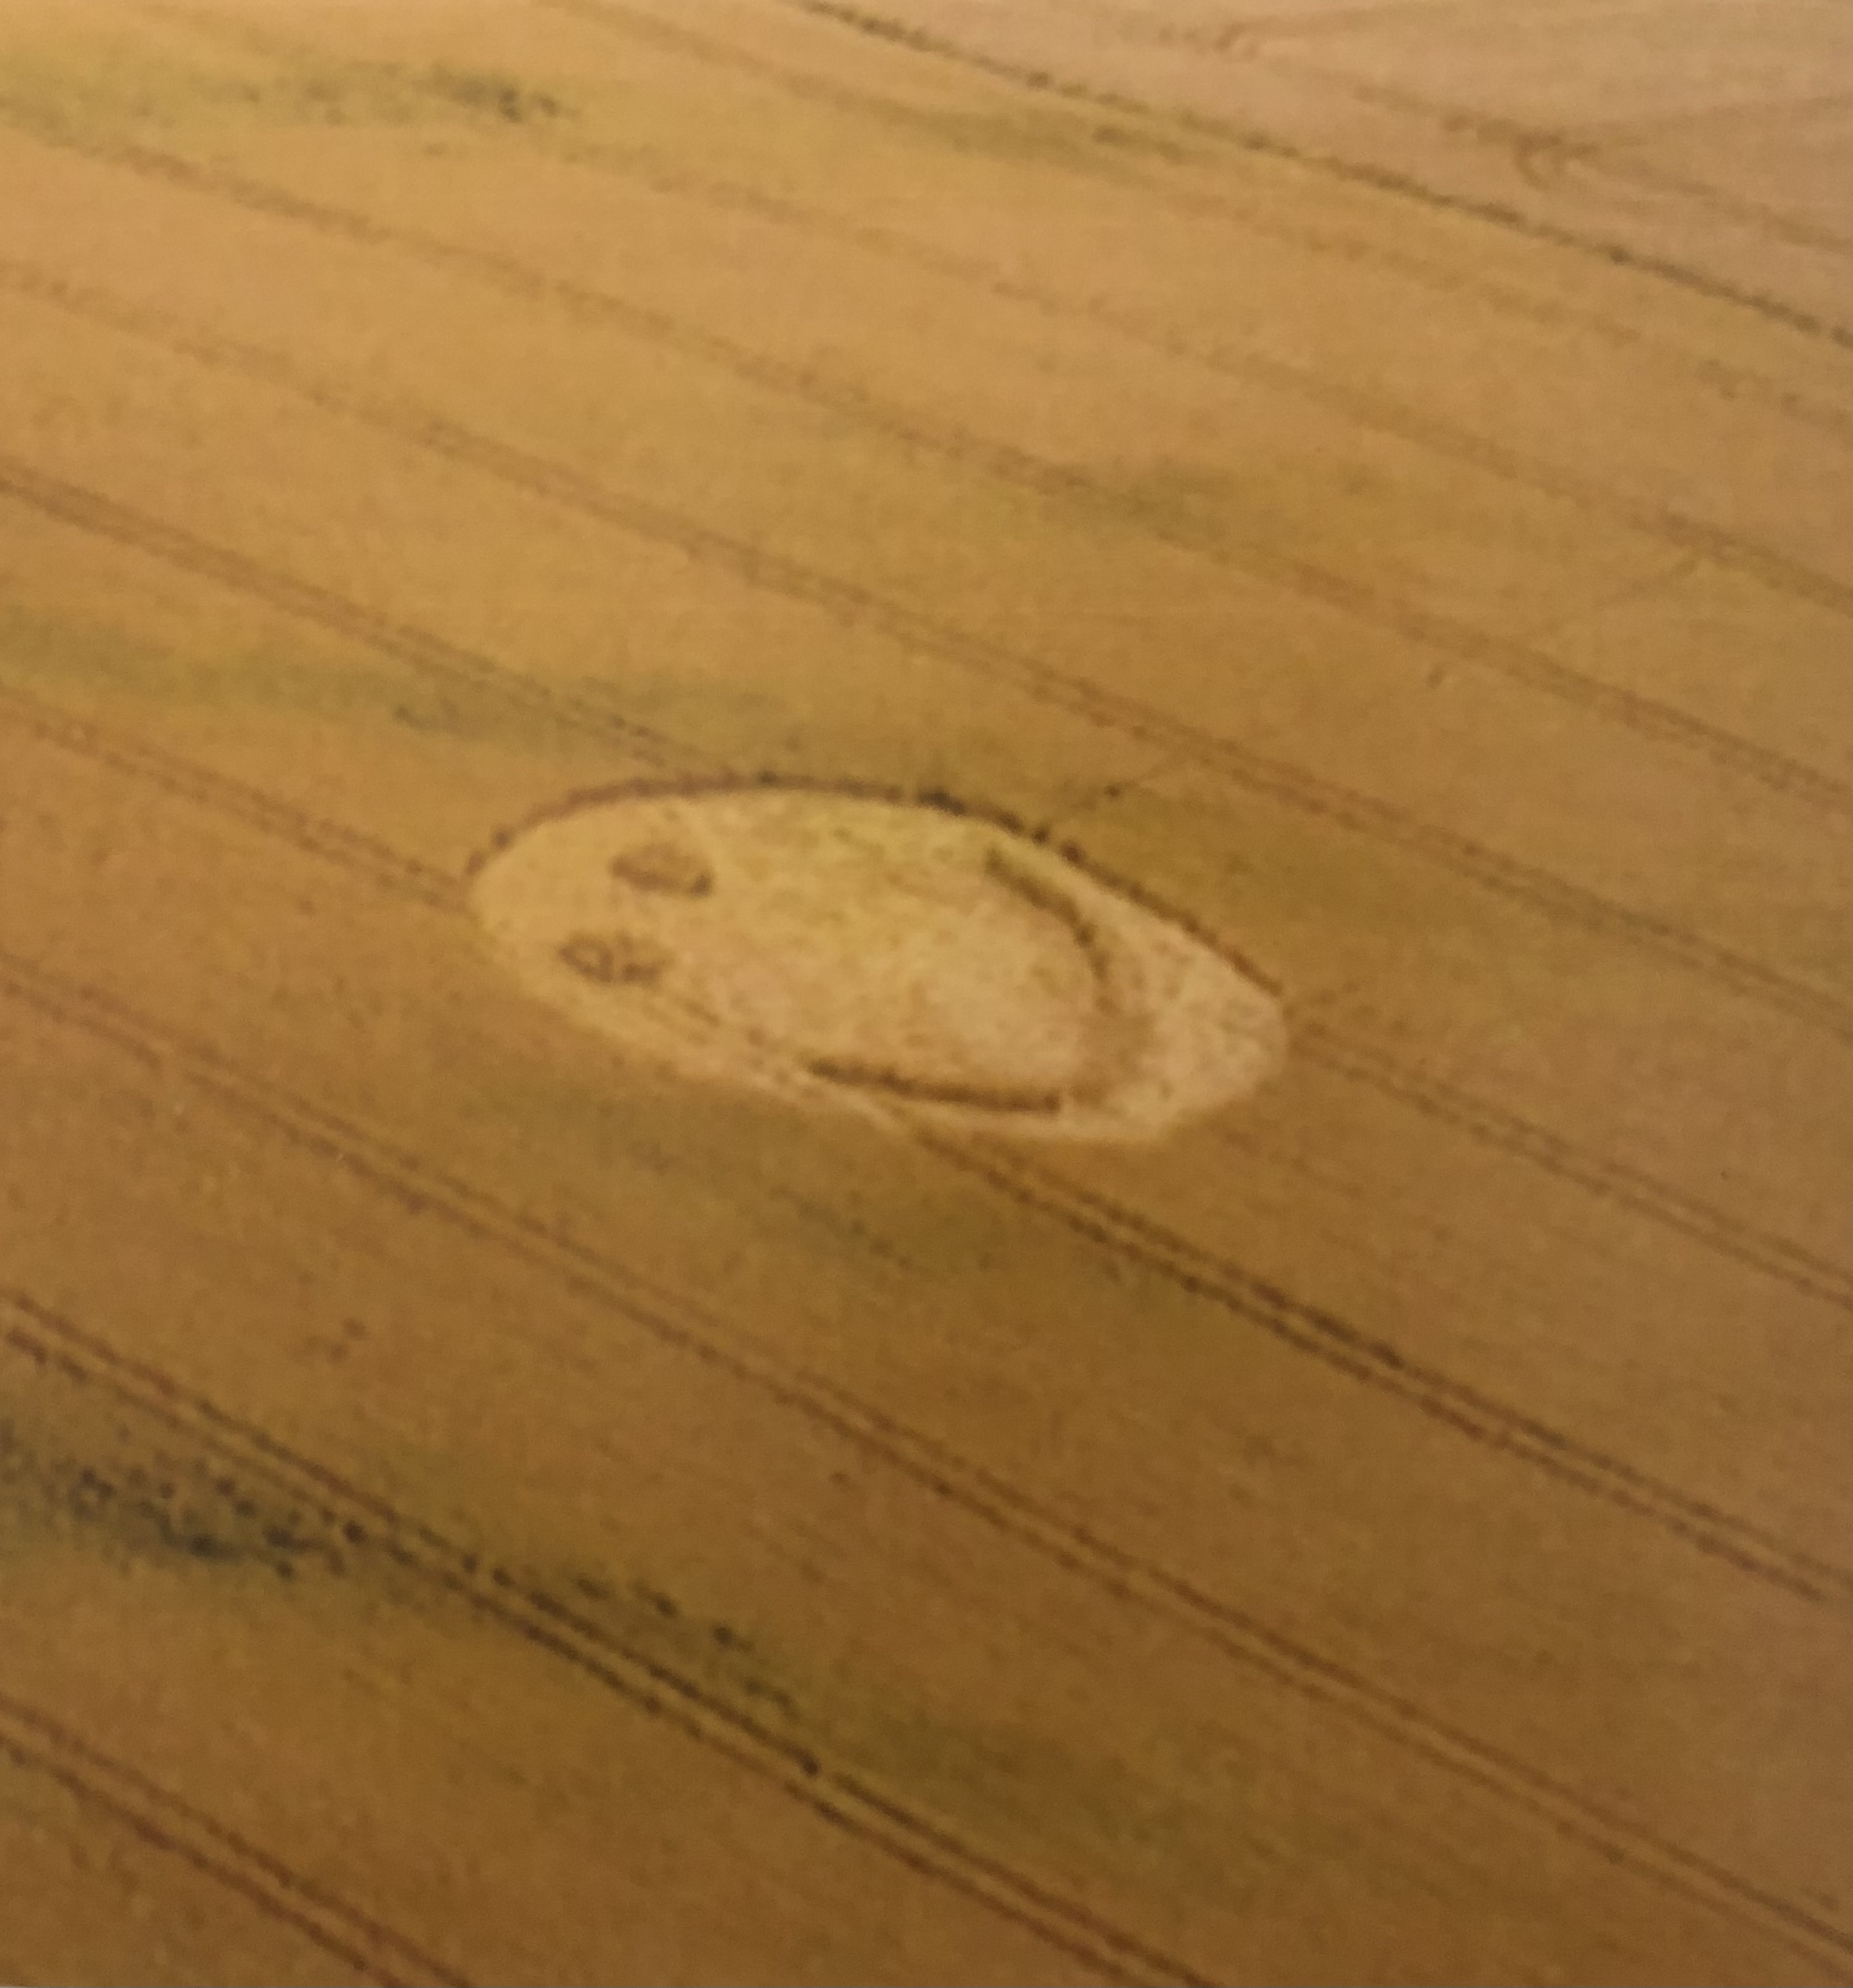 A side-aerial color photograph of a yellow field with diagonal parallel lines imprinted in it that run top left to bottom right in the frame. A crop circle in the shape of a smiley face sits diagonally in the center of the frame.